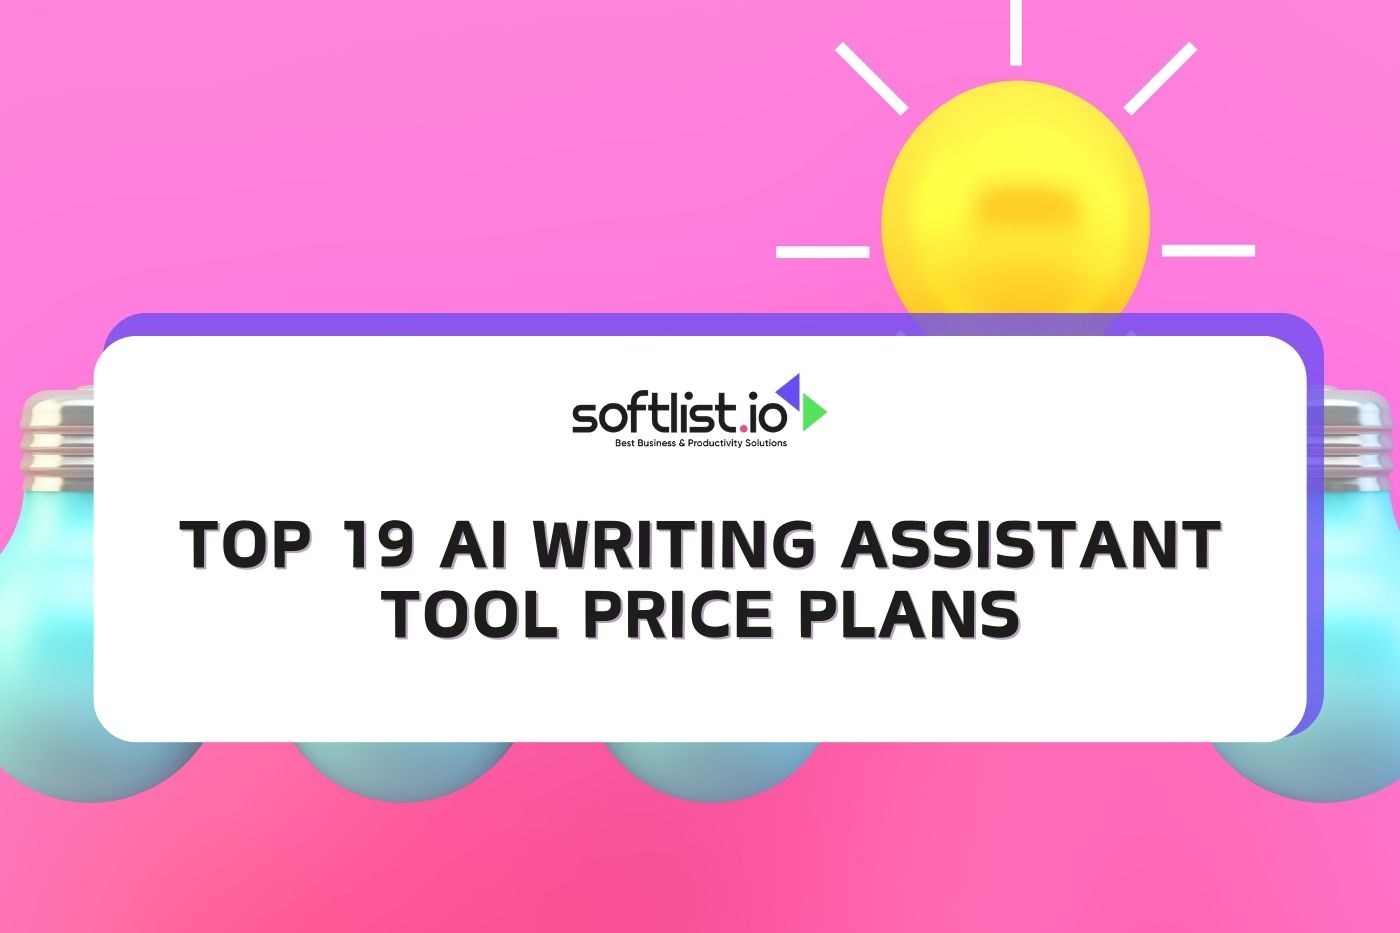 Top 19 AI Writing Assistant Tool Price Plans